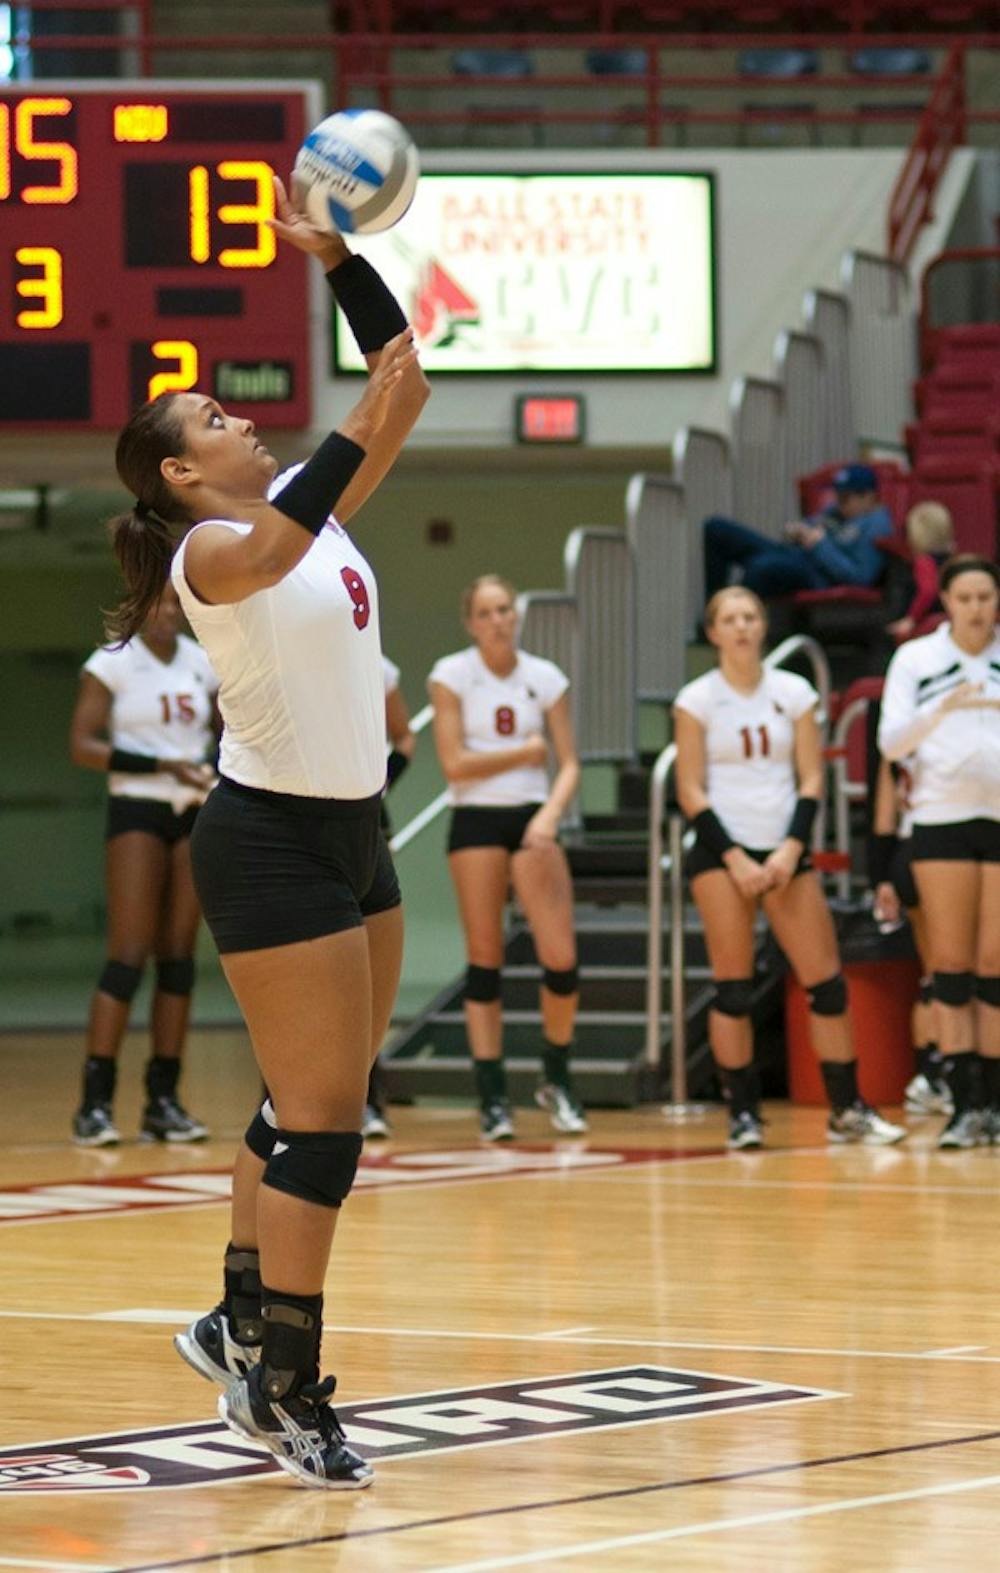 Jaclyn Fullove serves the ball during Sunday’s game against Northern Illinois University. Fullove played in a total of six sets this year compared to her four sets last year